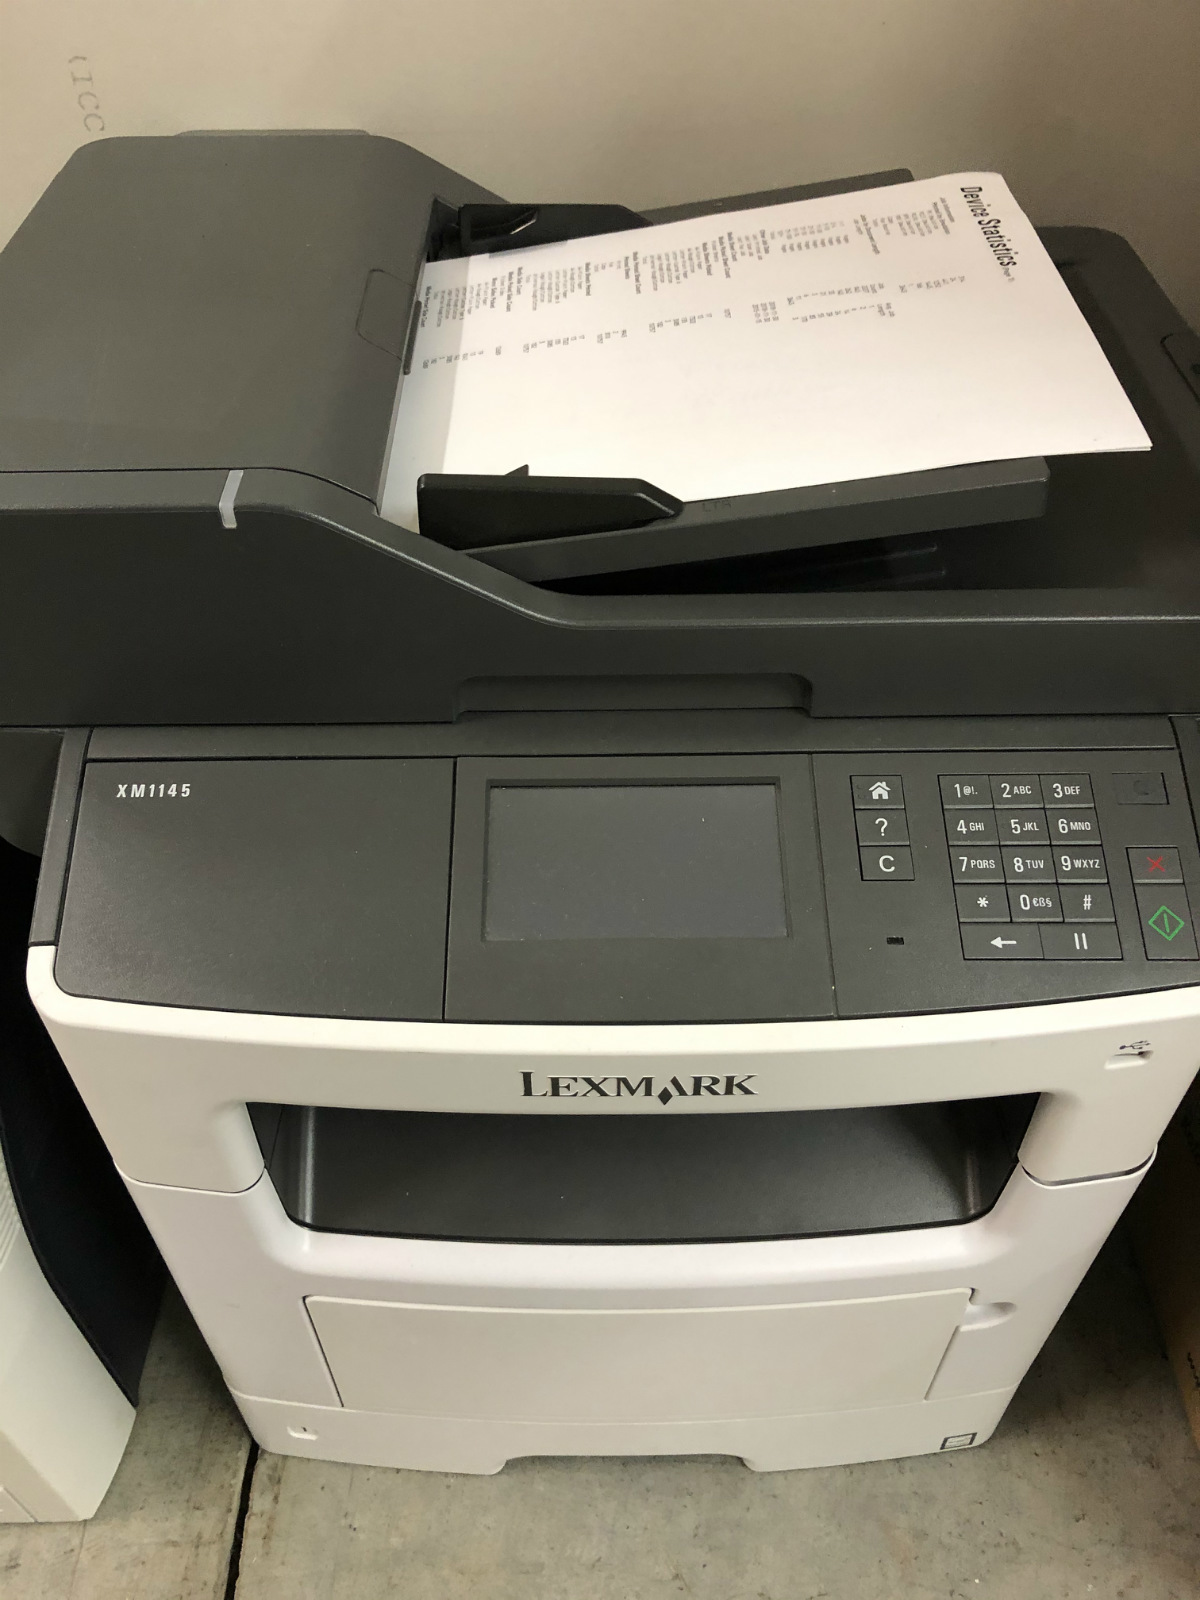 Lexmark XM1145 All-in-One Workgroup Laser Printer - 100k Pages & Complete! - $193.28